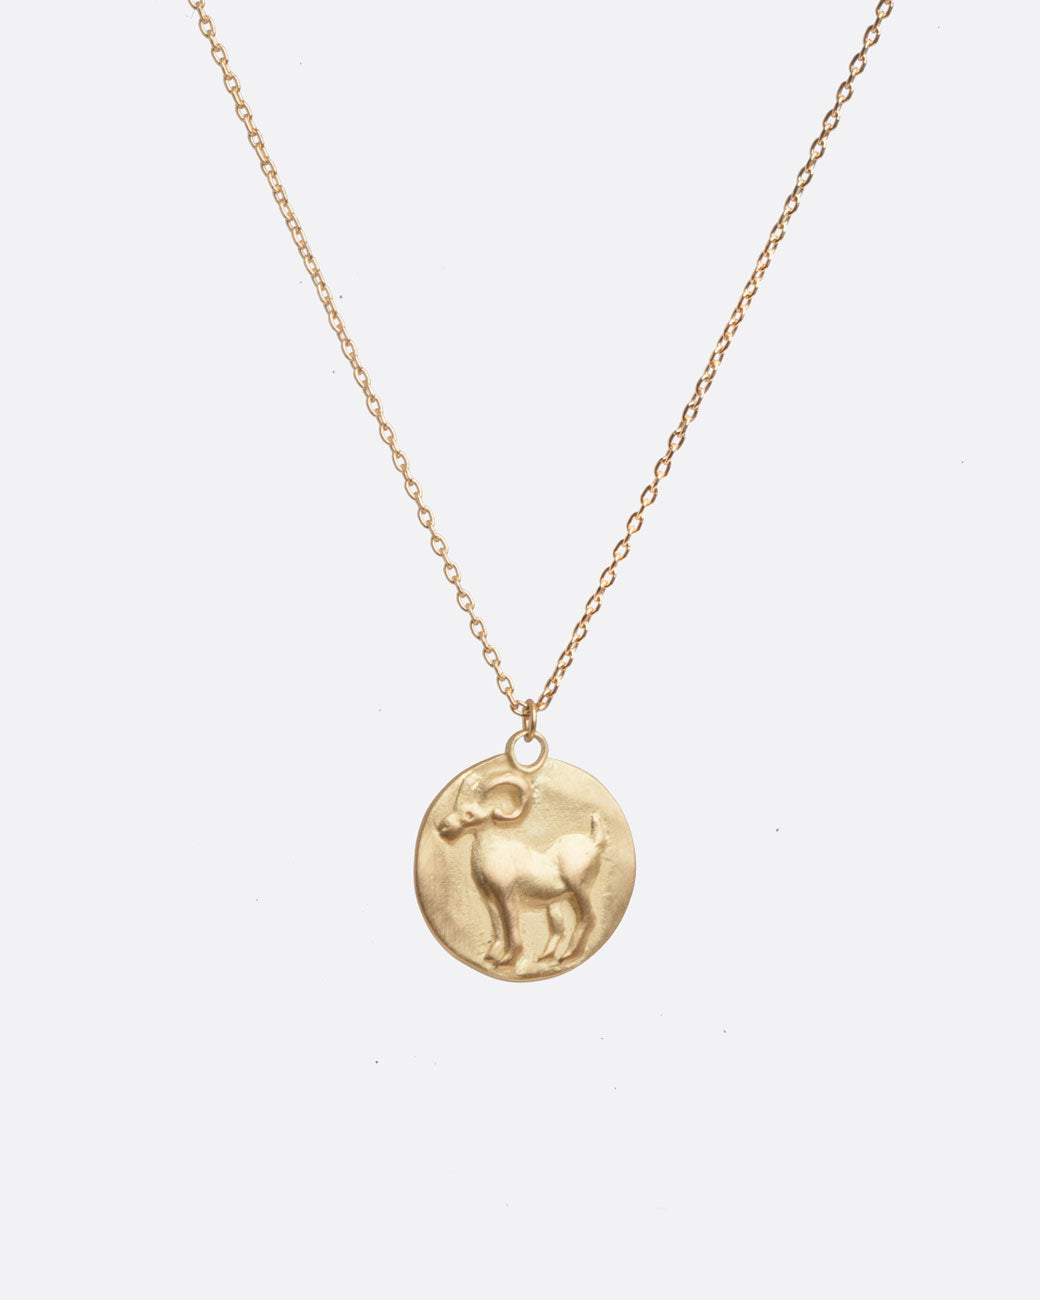 Close up birds eye view of gold disc pendant with Aries ram zodiac symbol on yellow gold chain